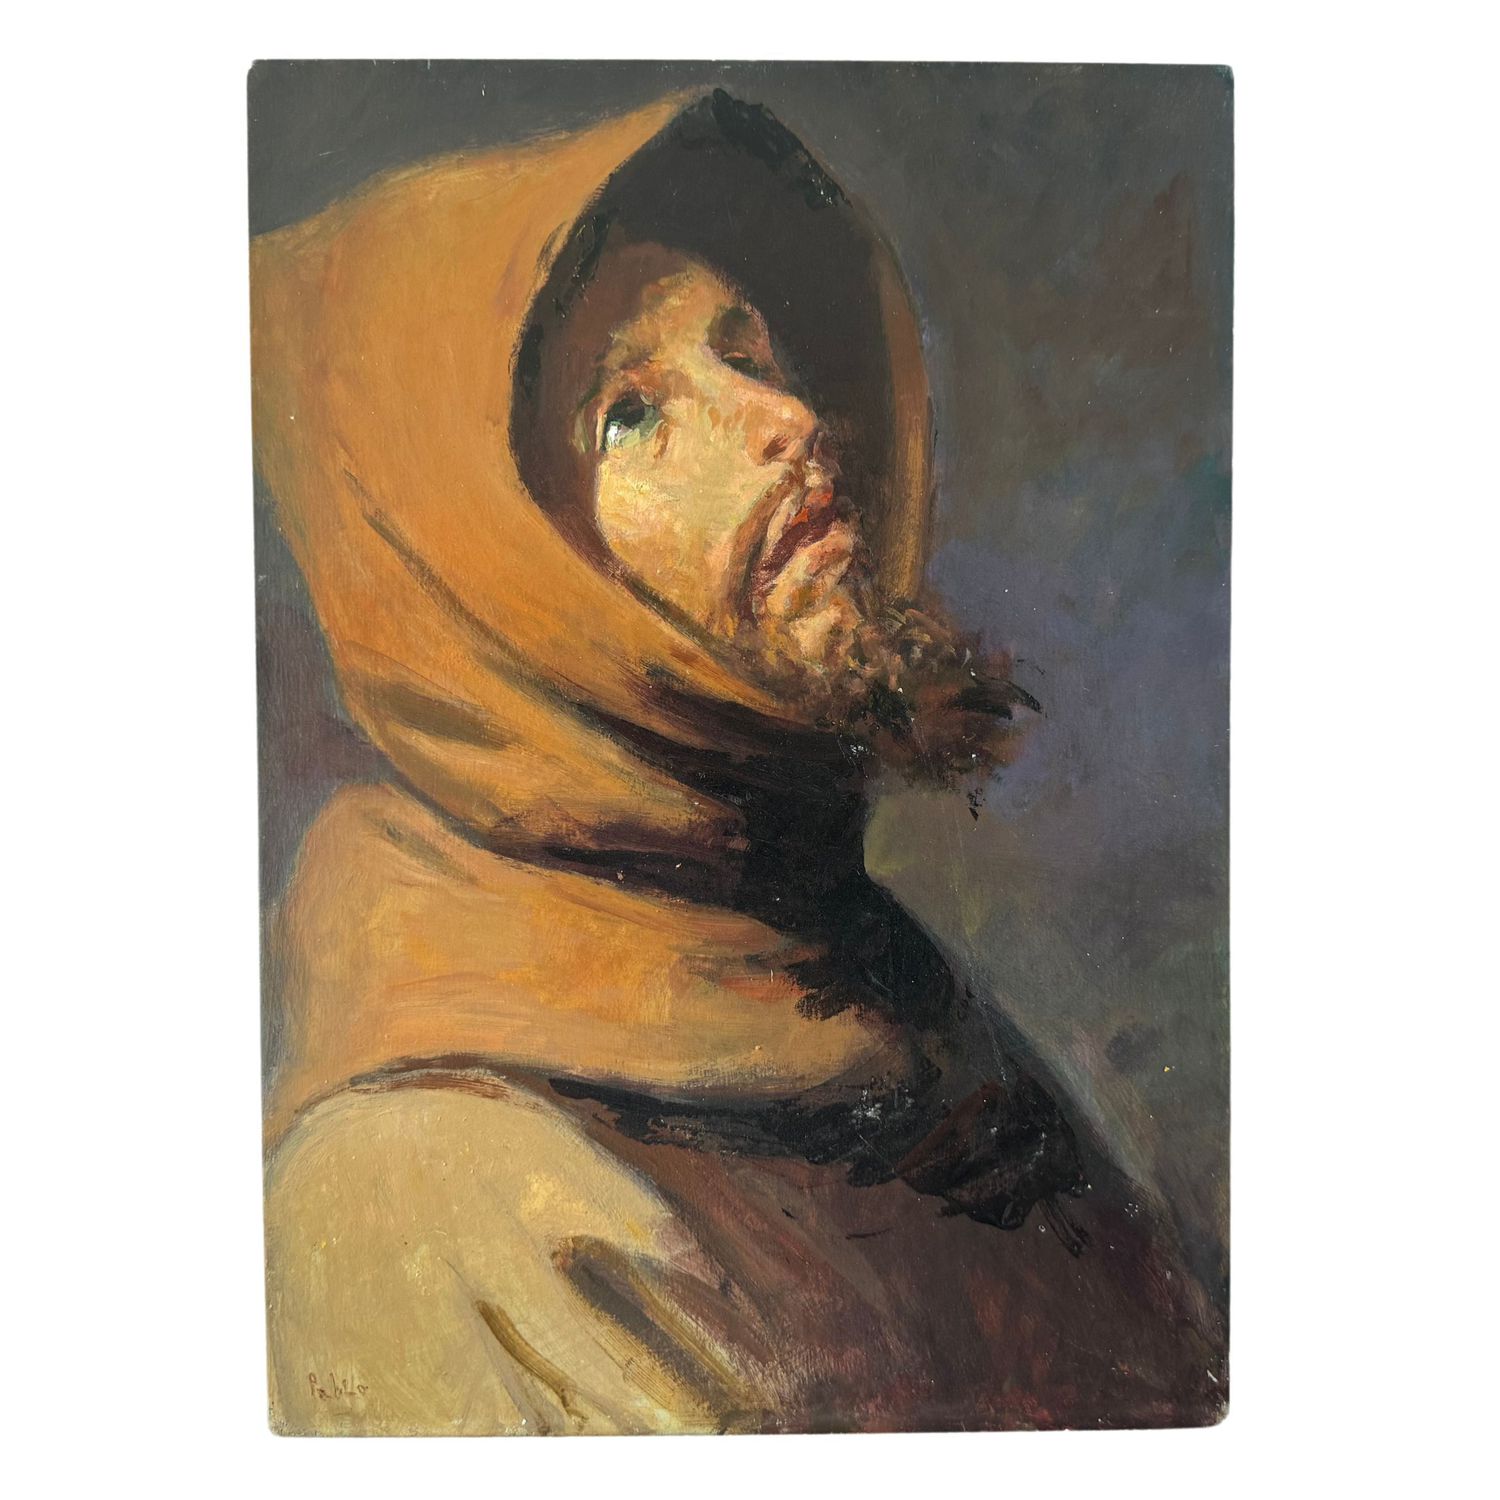 Man with a hood